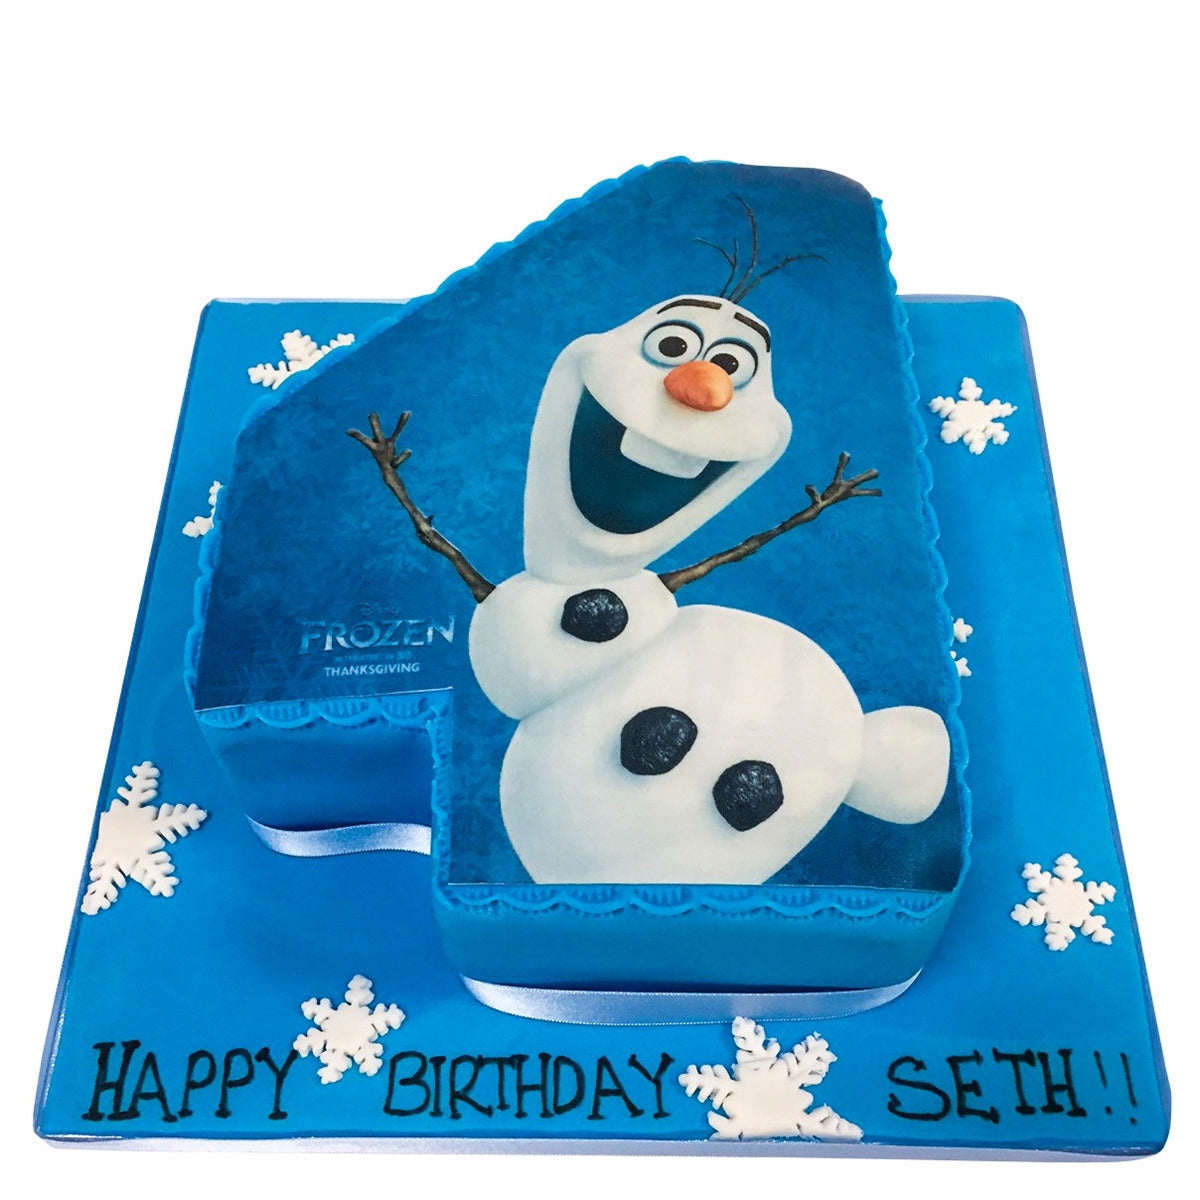 21 Disney's Frozen Birthday Cakes ideas and Images